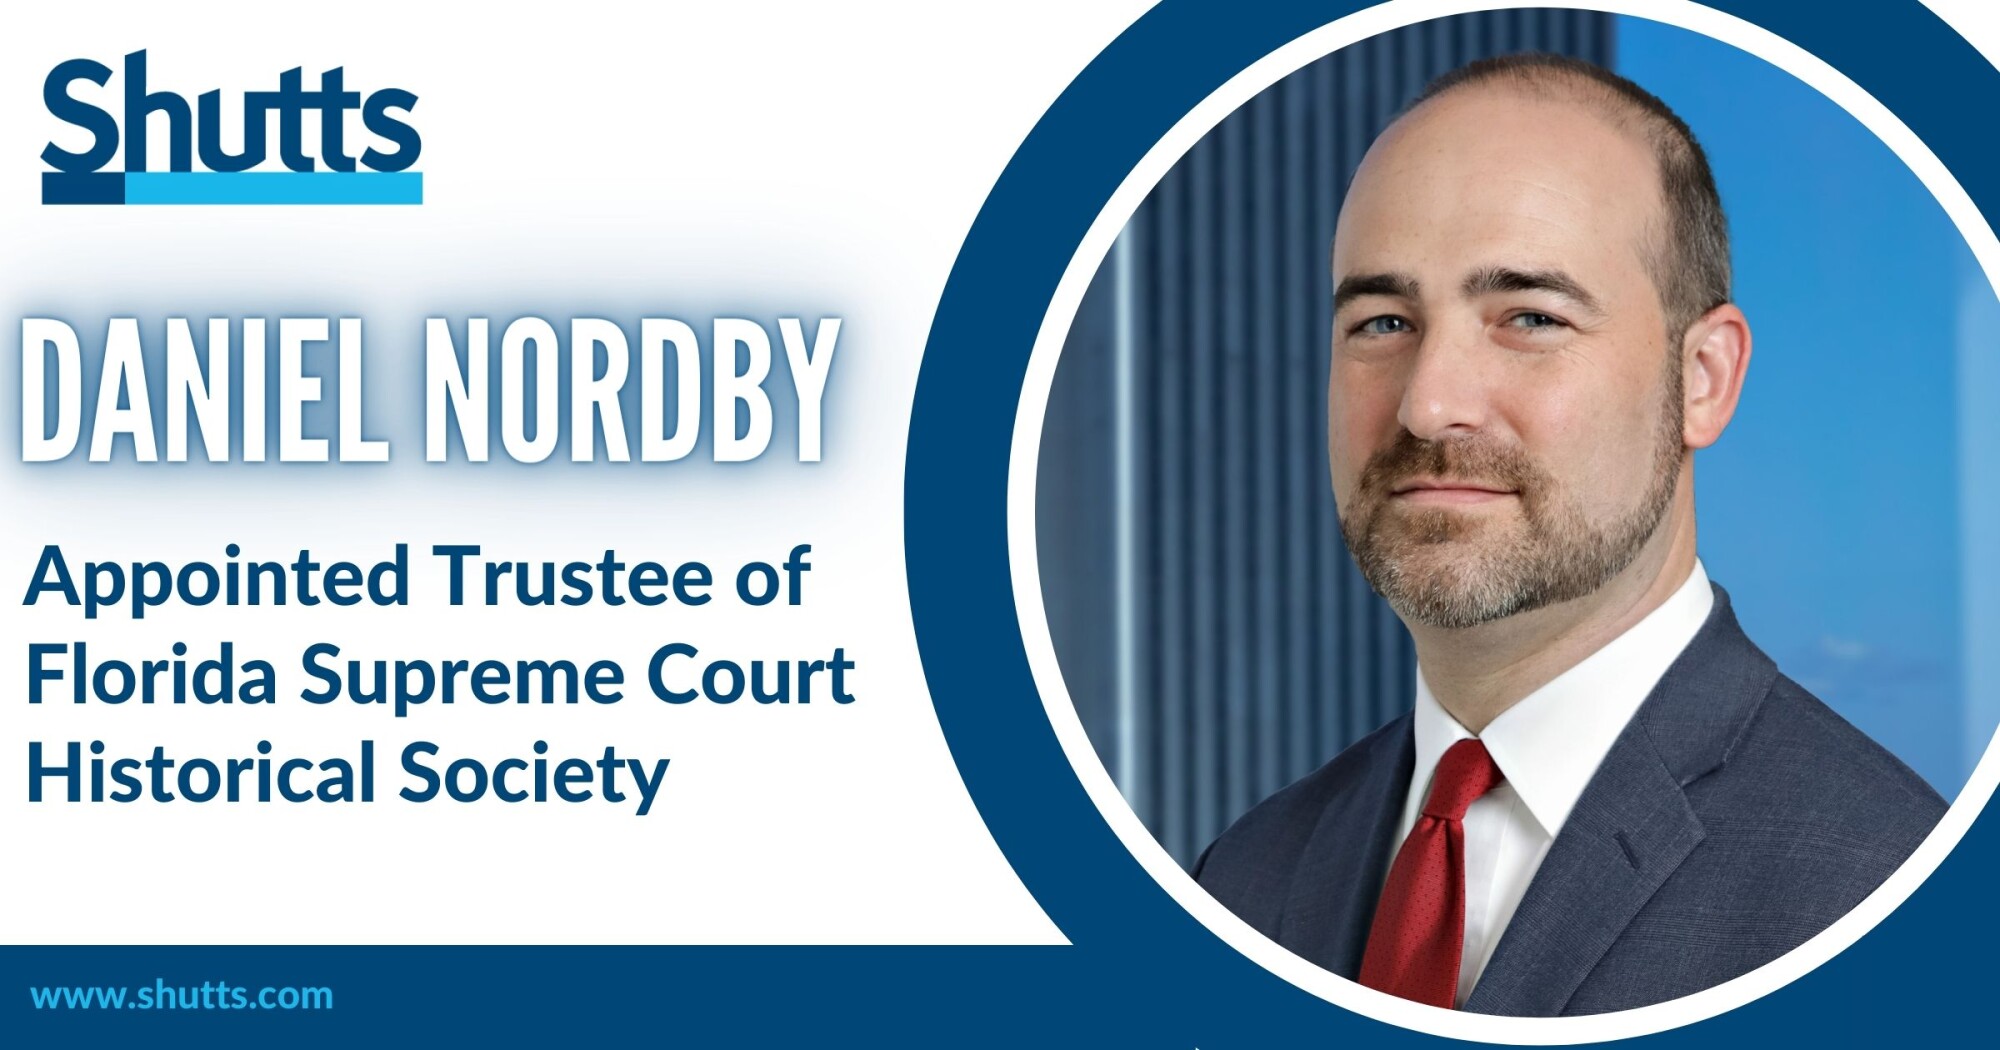 Daniel Nordby Appointed Trustee of Florida Supreme Court Historical Society